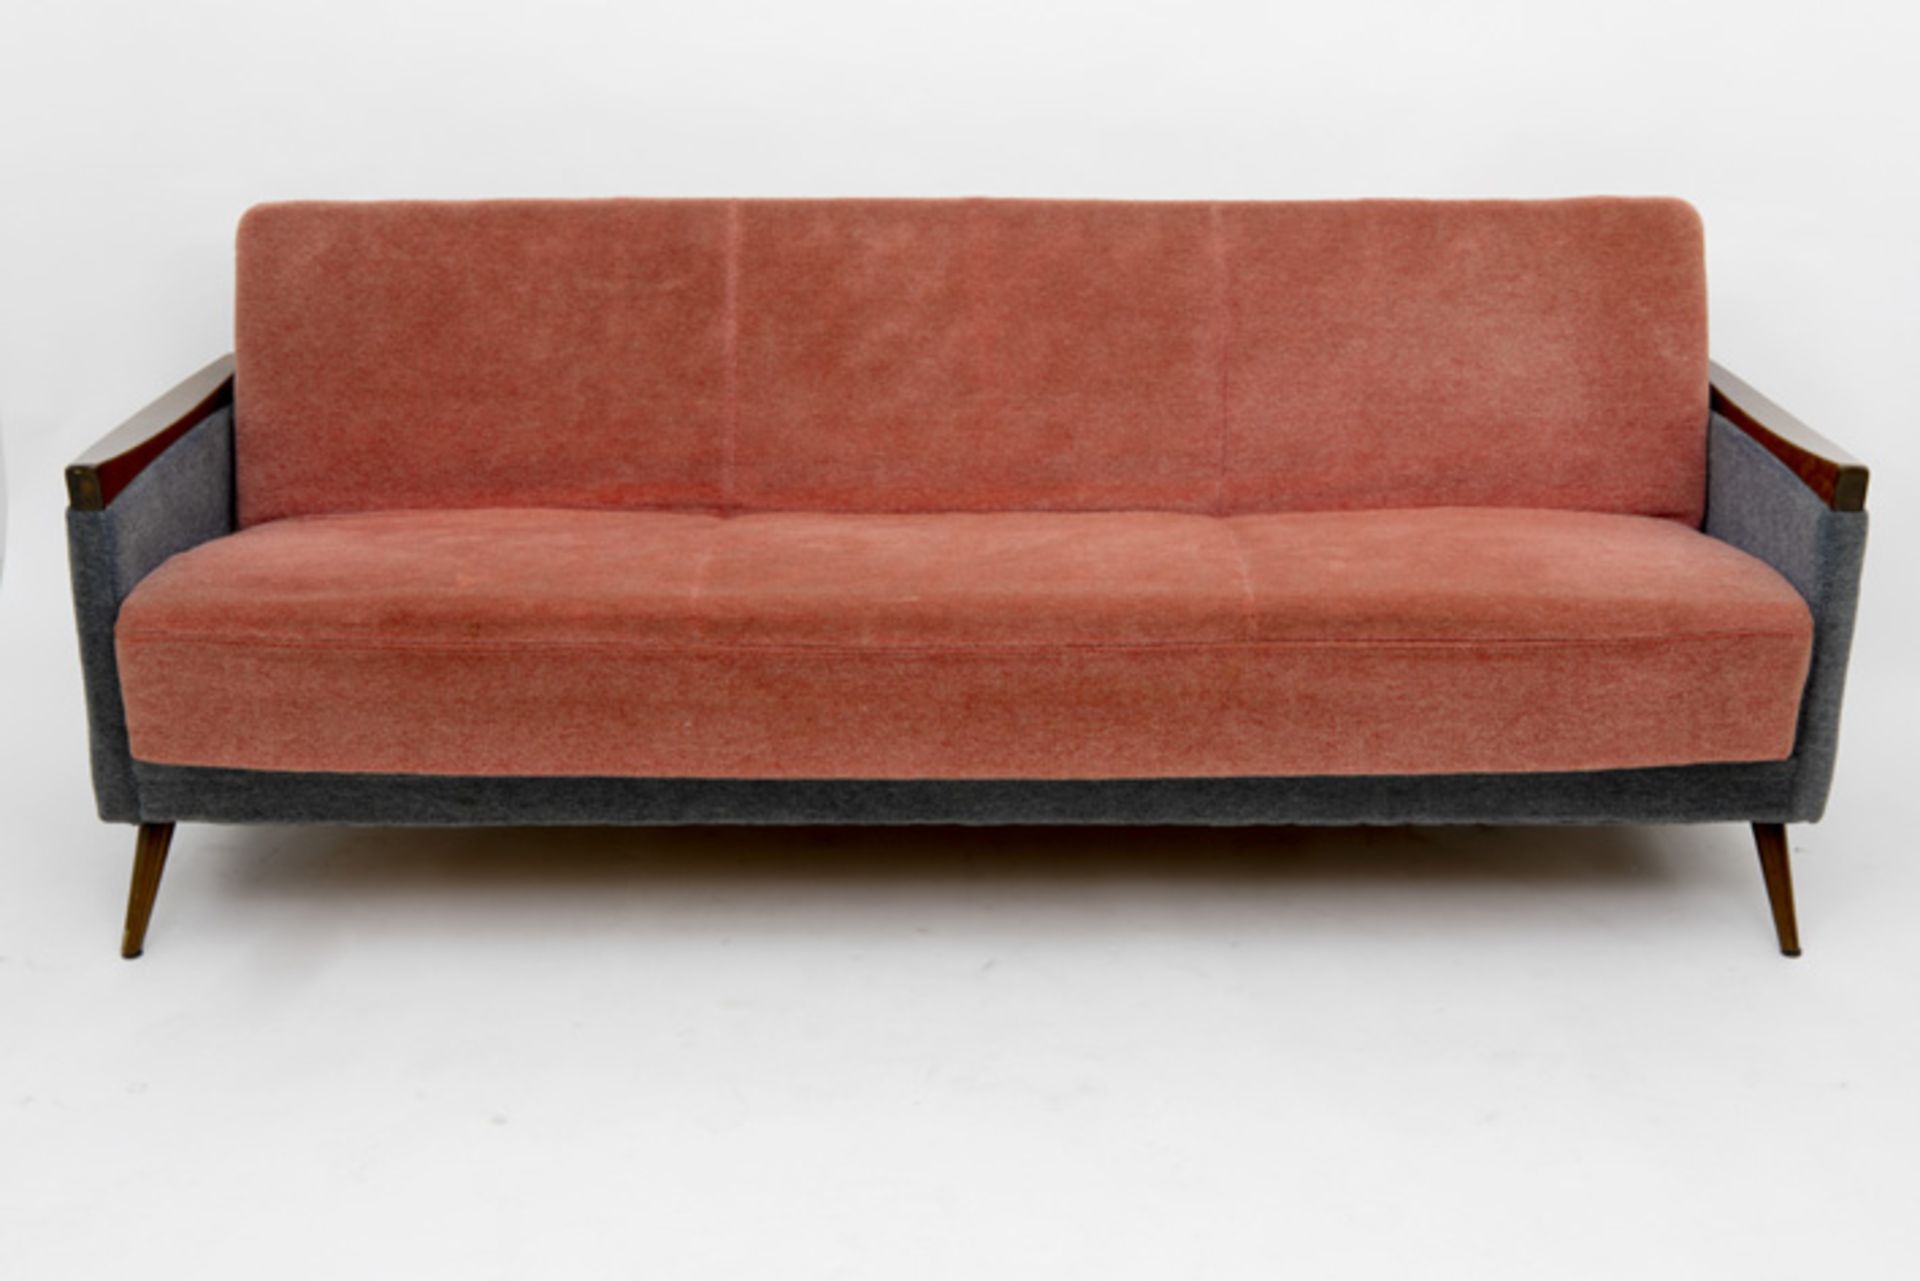 fifties' "Hans Knebel St Ilgens" labeled daybed/sofa with typical design from around 1956 and origin